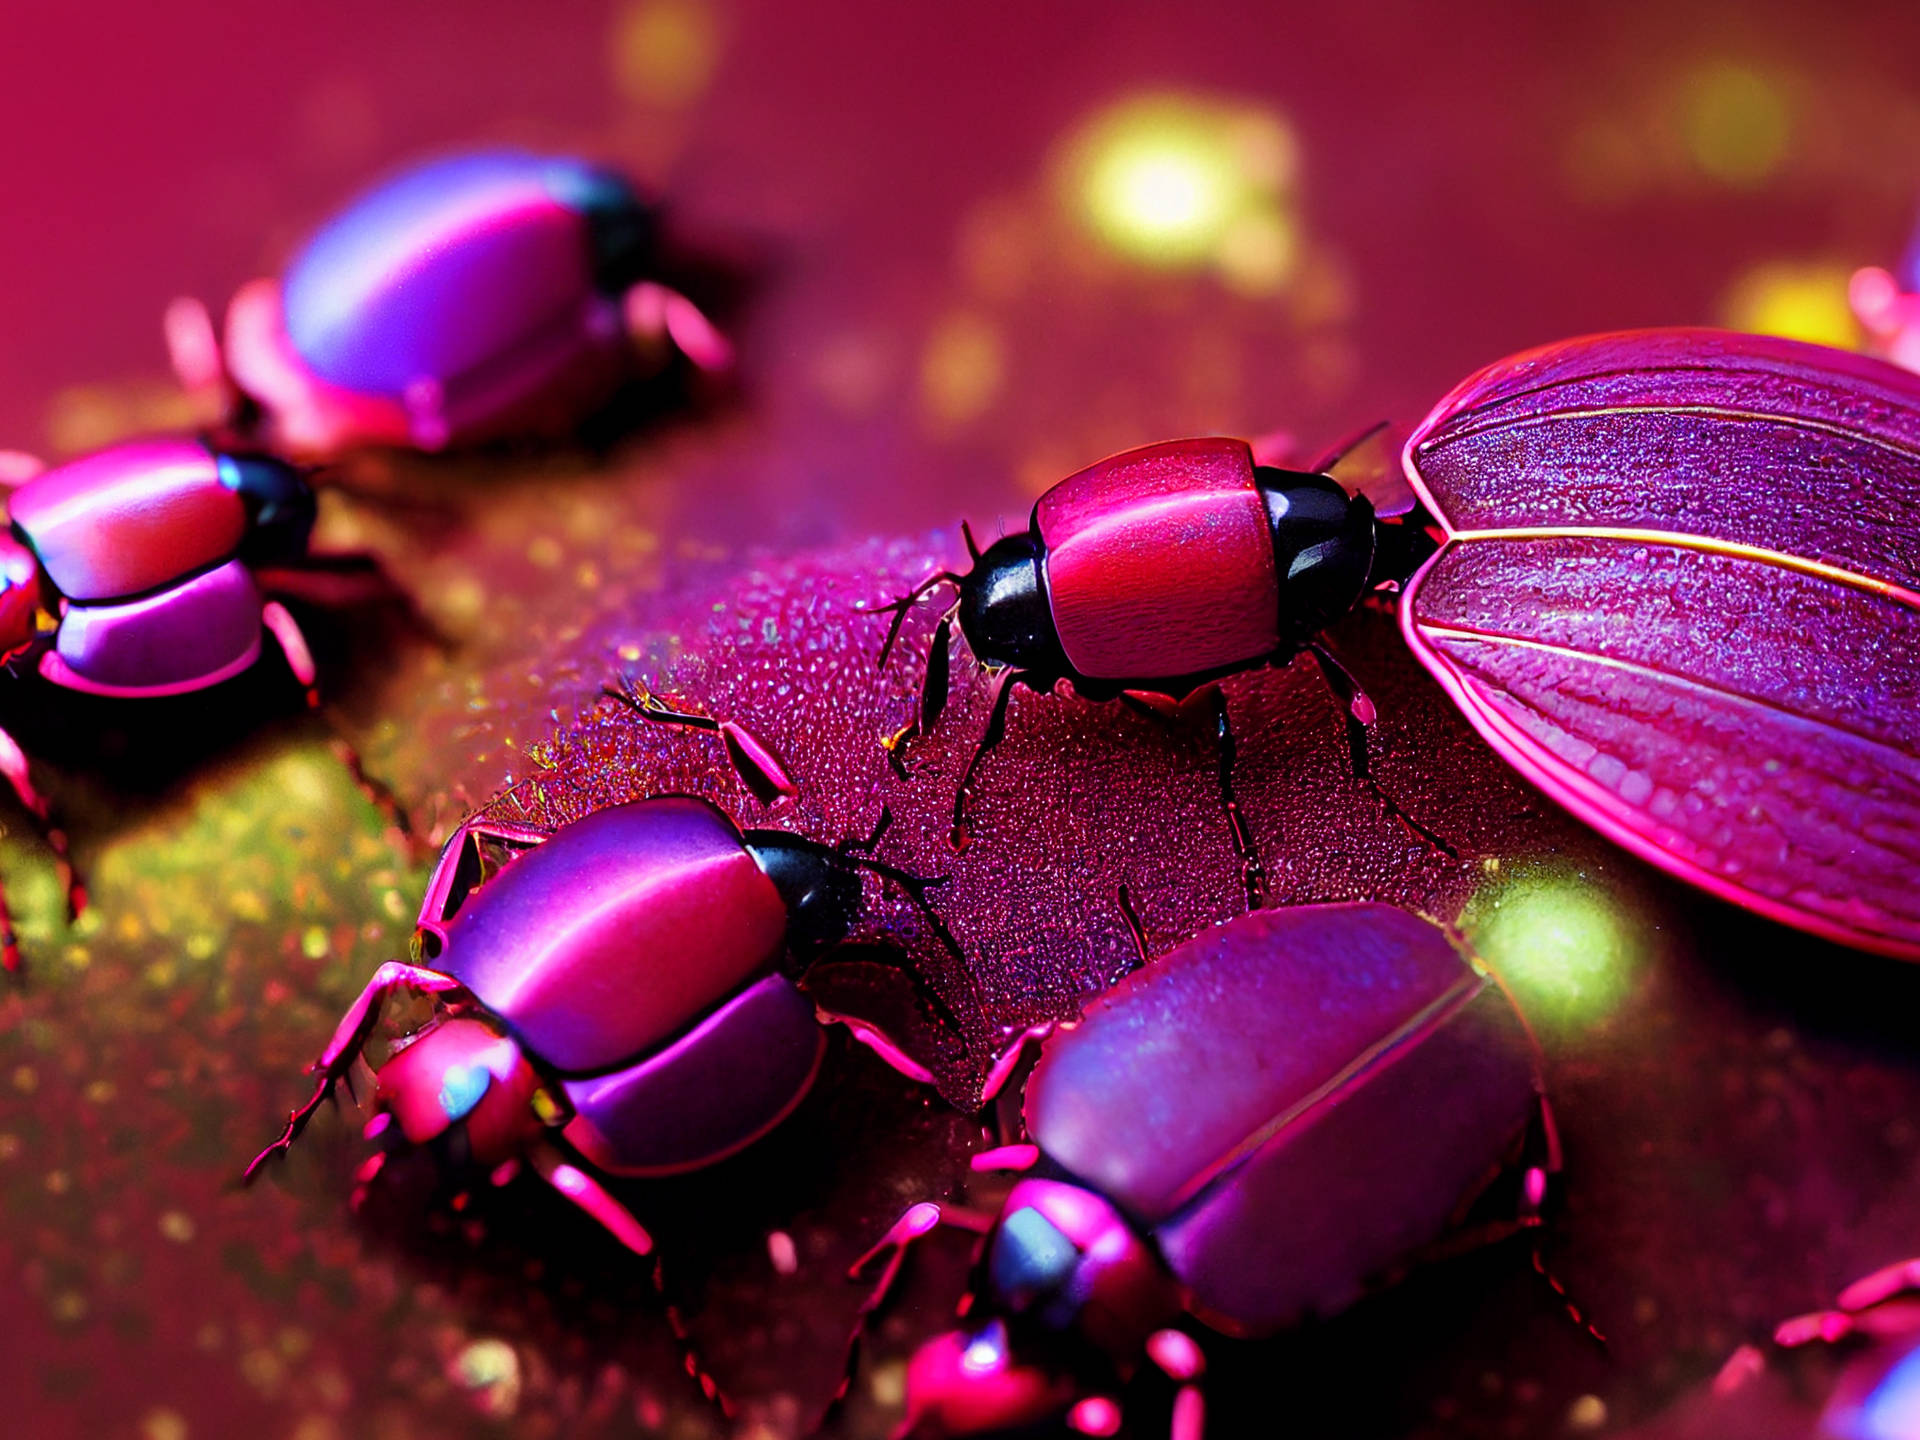 Glossy Magenta Insects Up-close Wallpaper